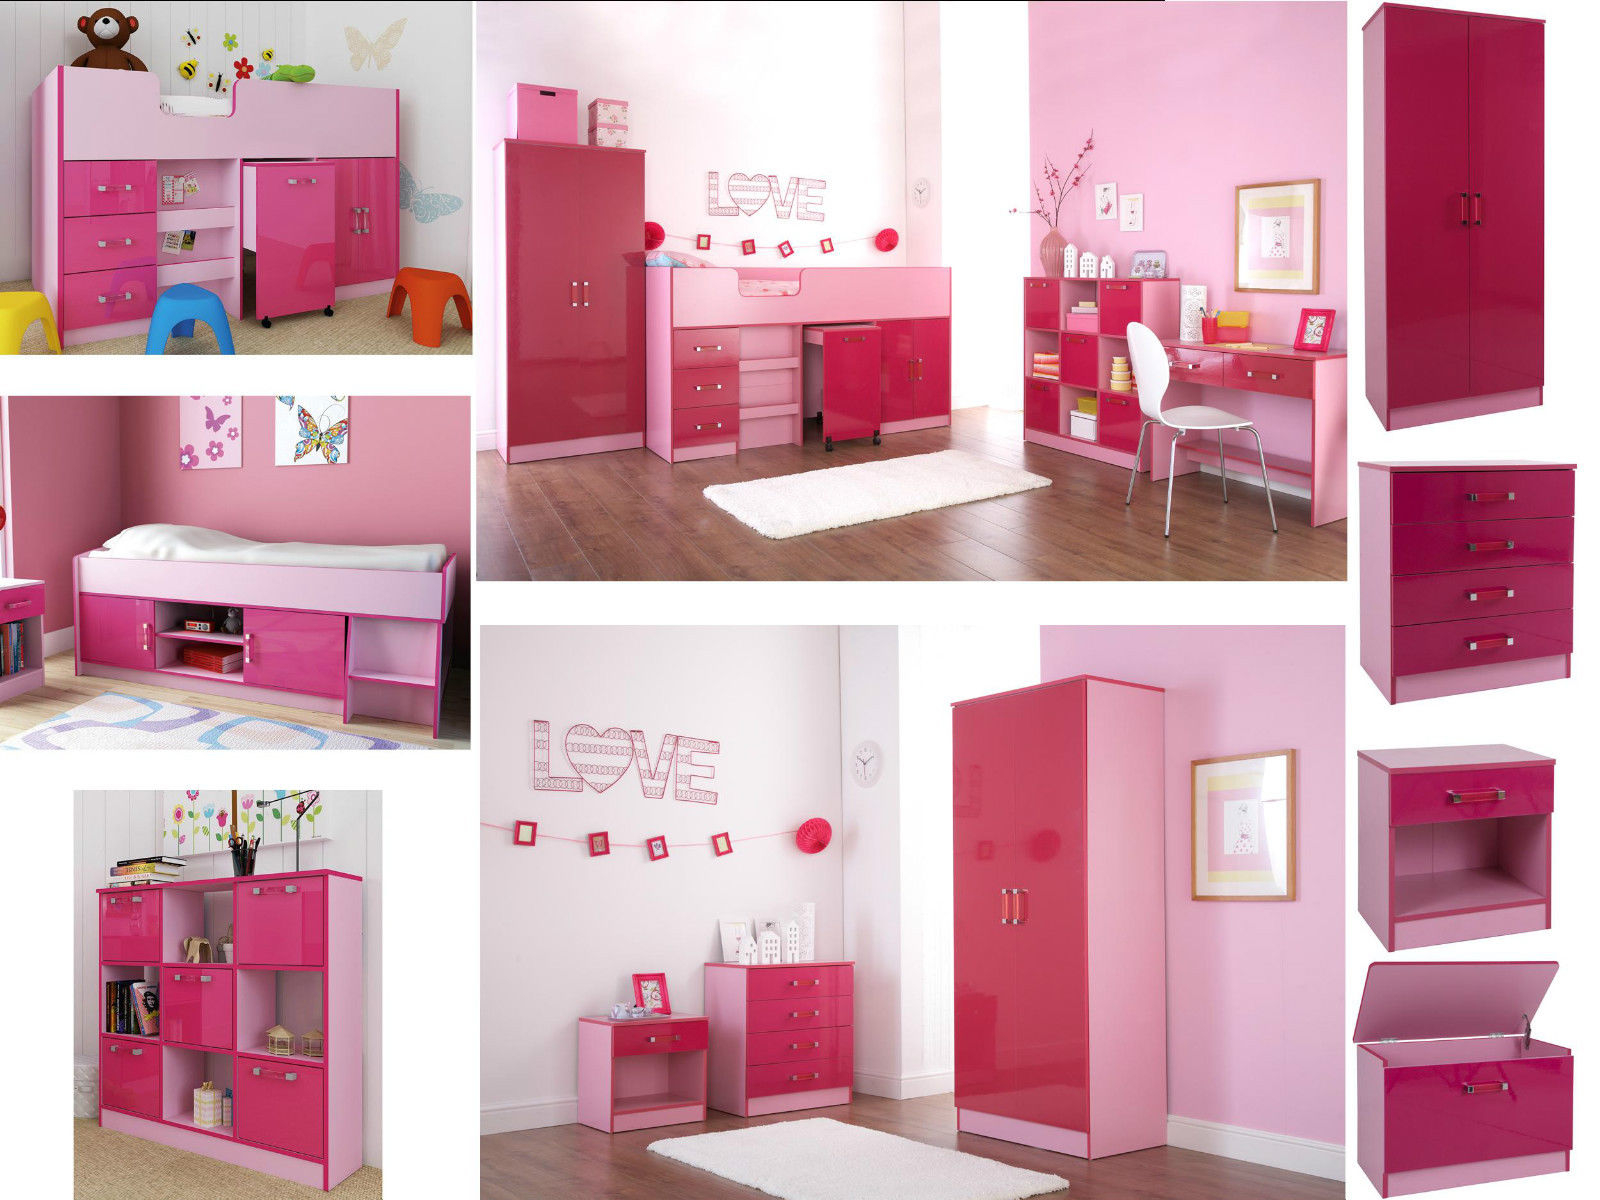 Details About Ottawa Caspian Pink Gloss Girls Bedroom Furniture Wardrobe Drawers Beds Sets intended for sizing 1600 X 1200